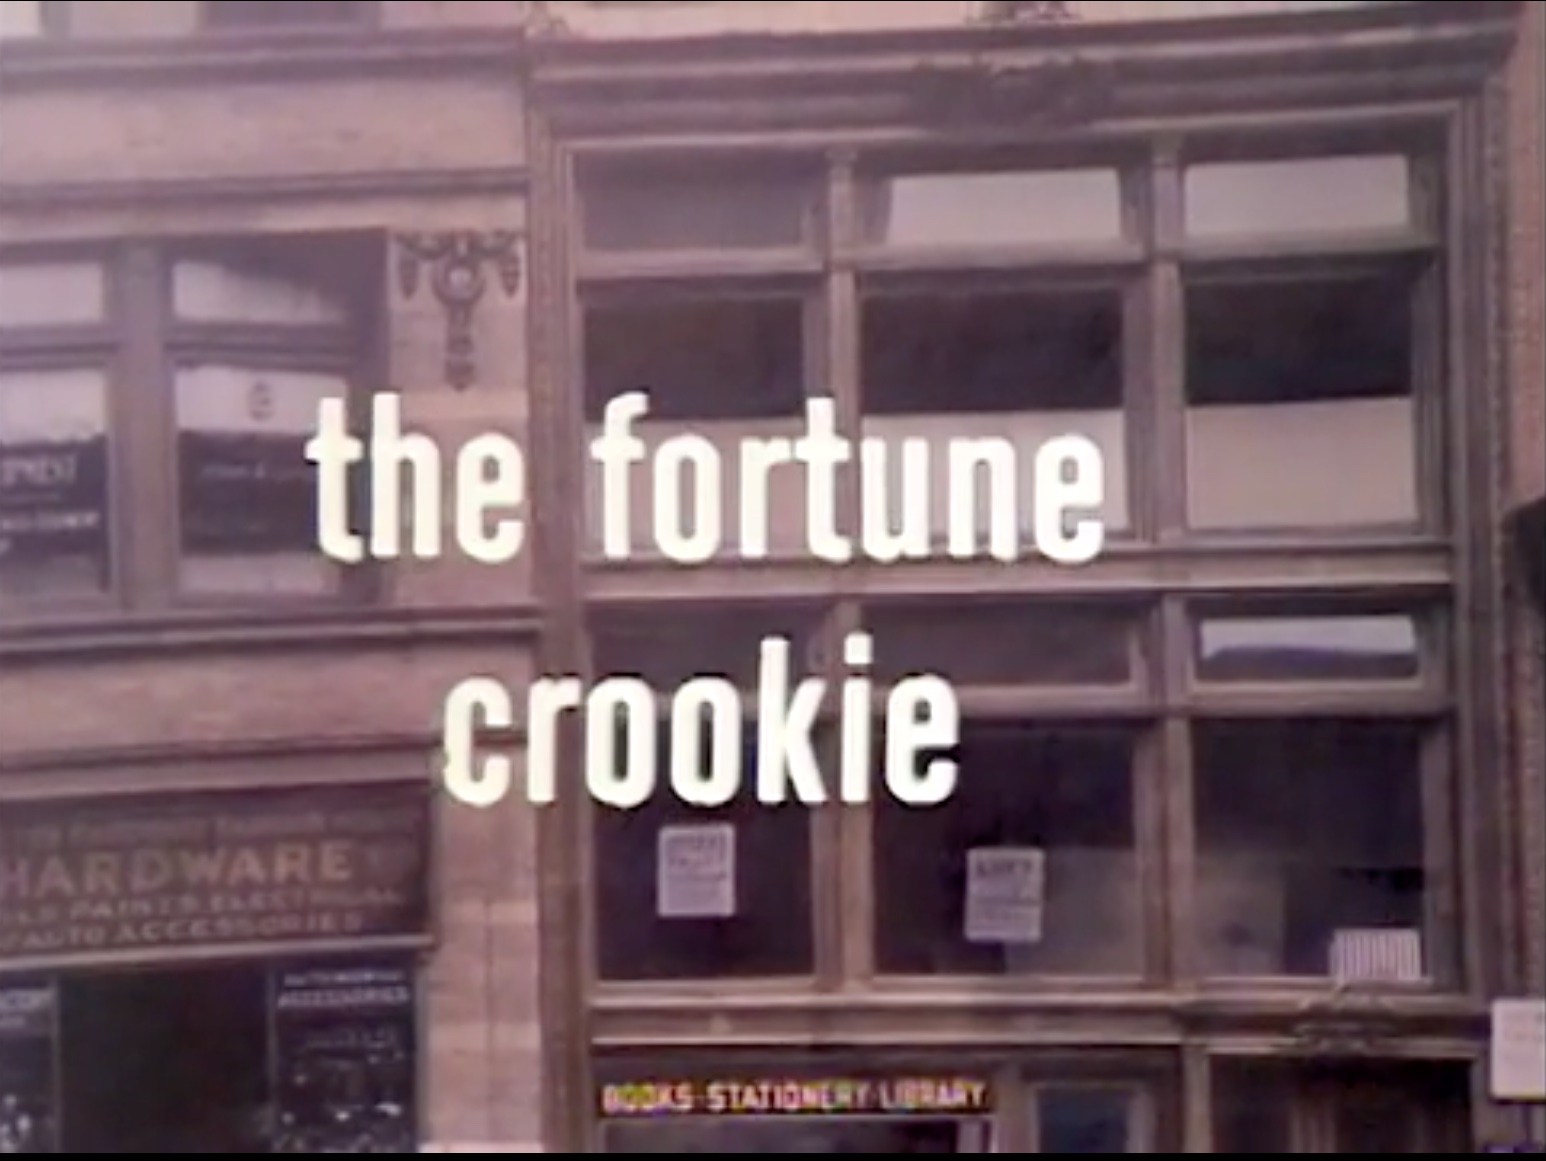 The Fortune Crookie - The Red Skelton Hour season 16, with Jackie Cookie, Ozzie and Harriet Nelson. Originally aired January 17, 1967